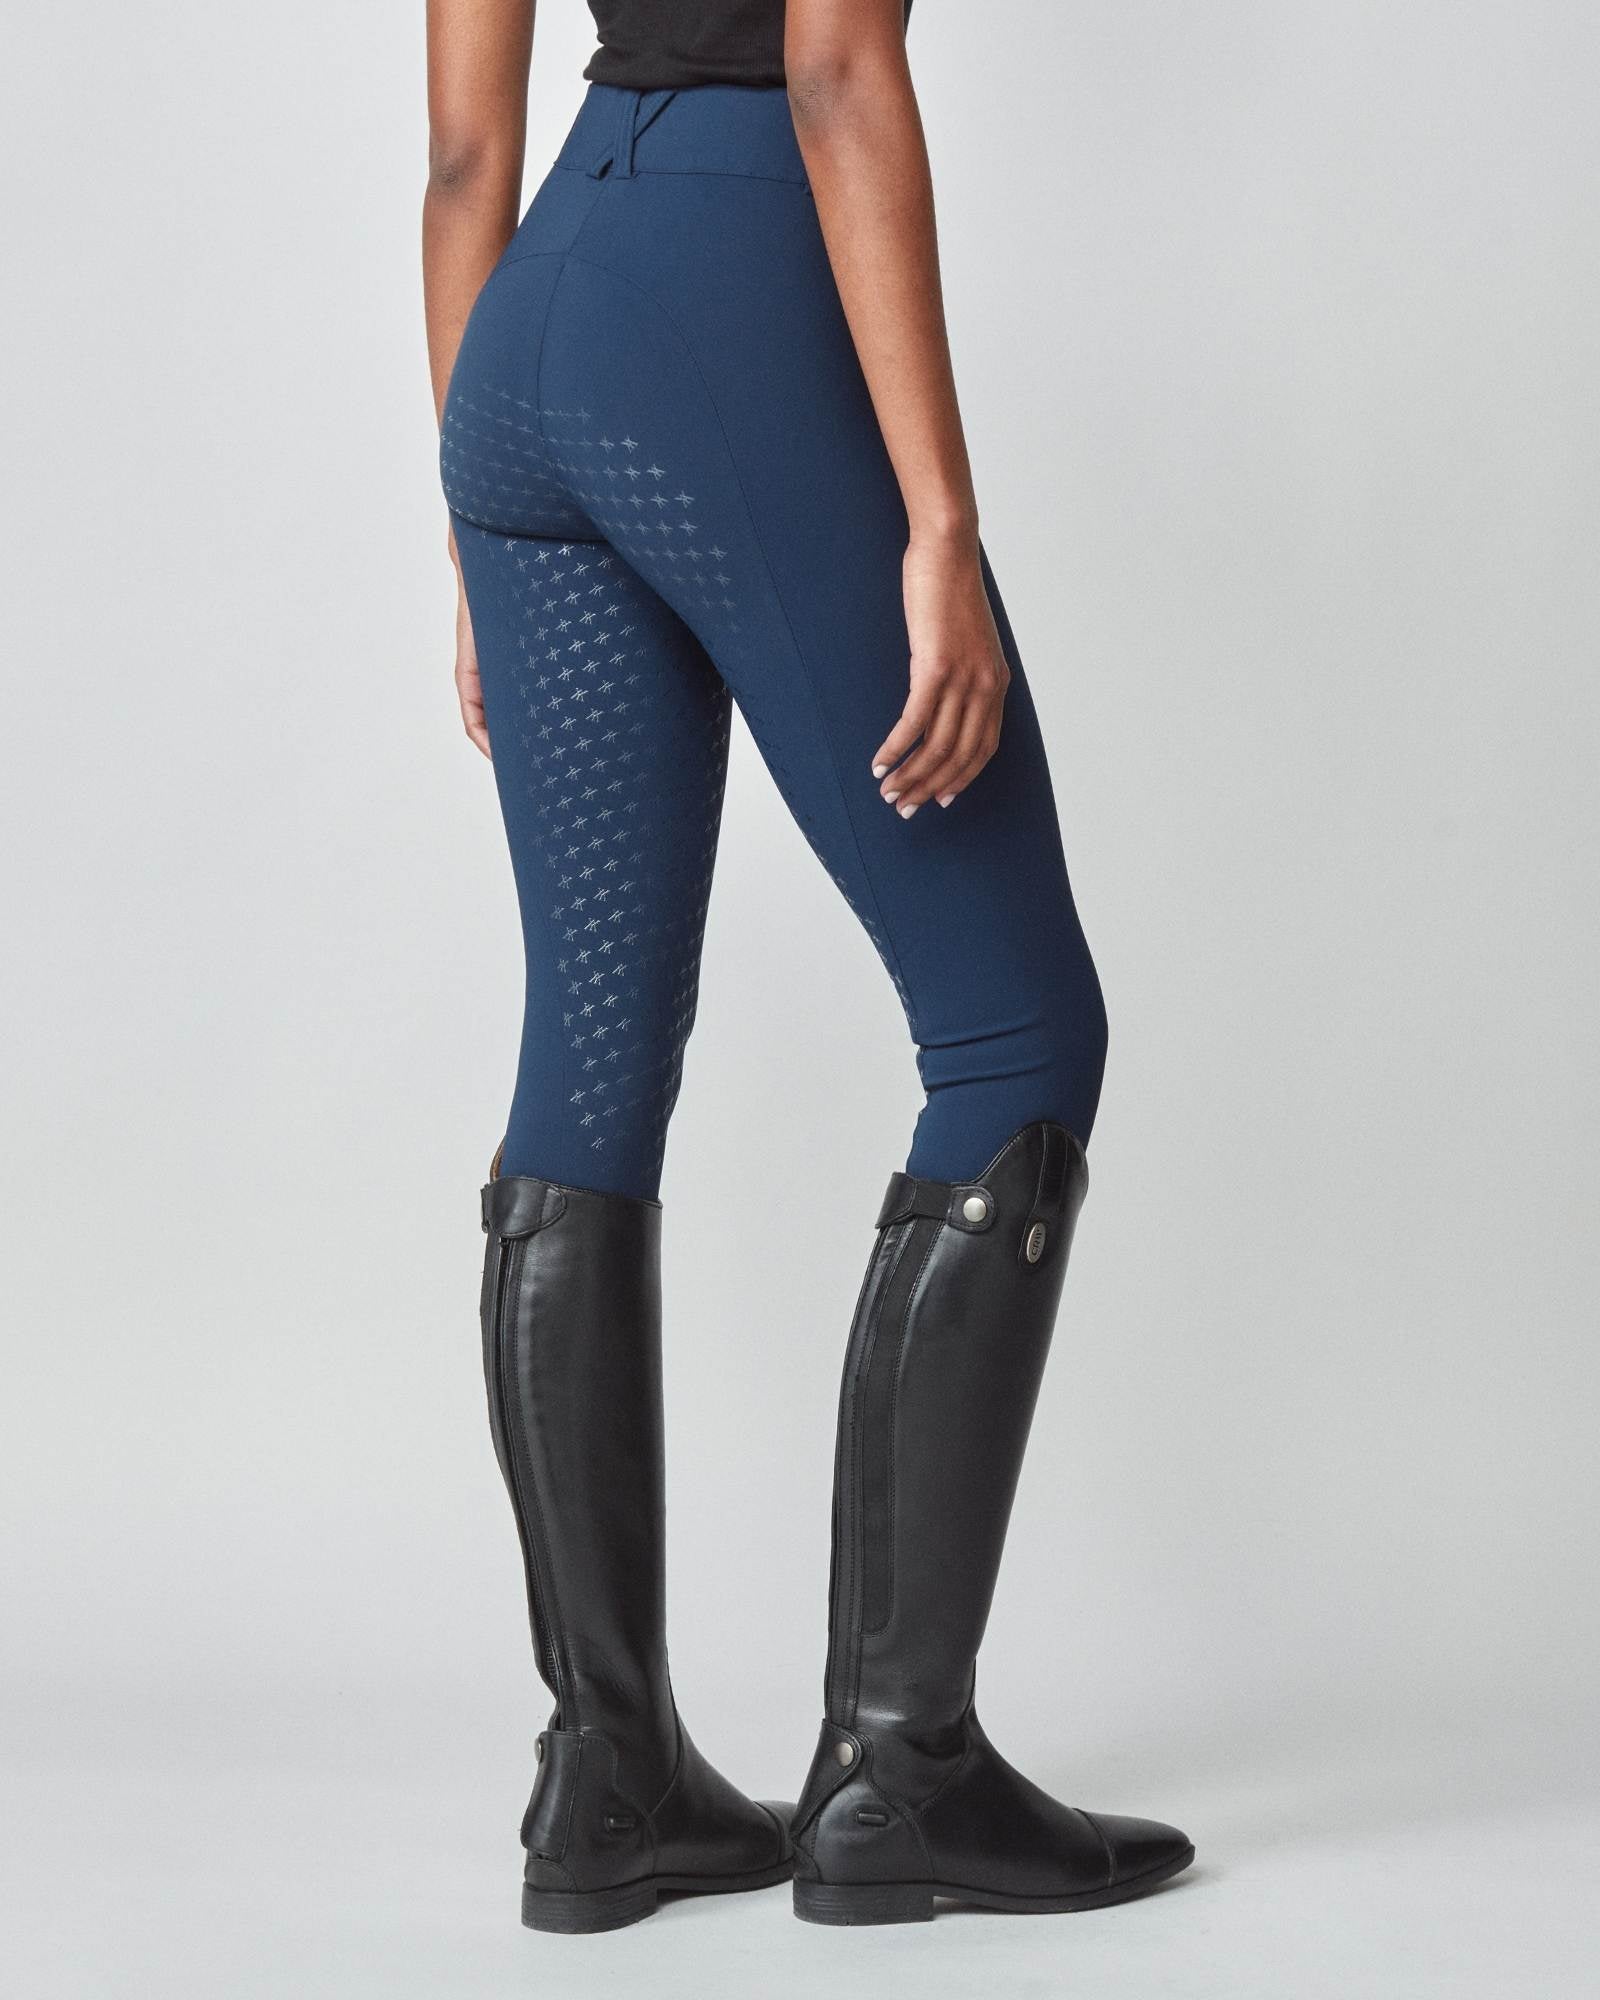 Compression Riding Breeches Navy